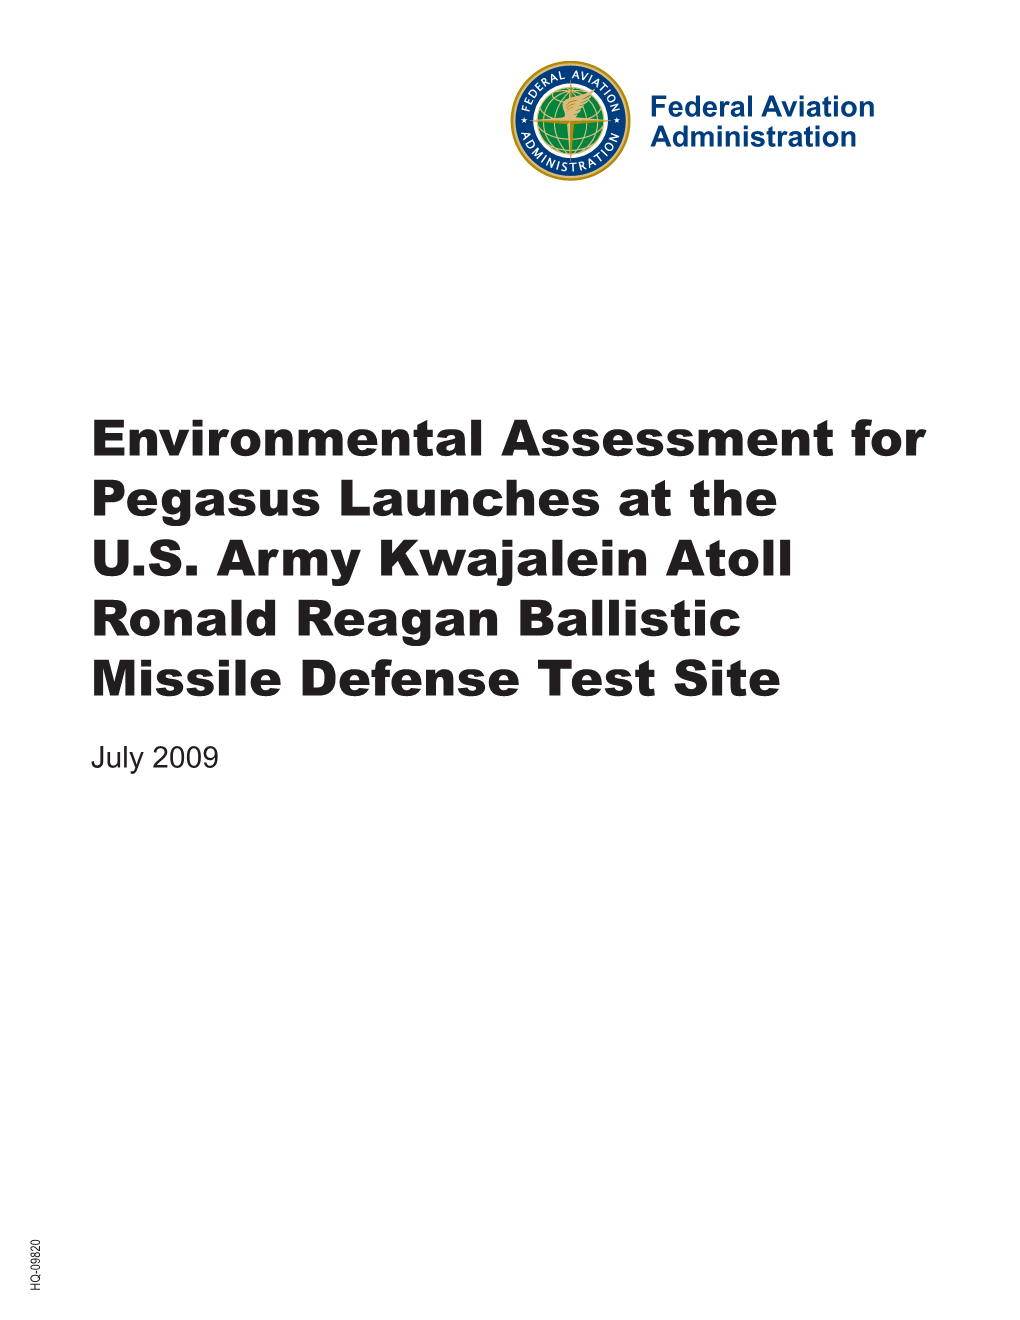 Environmental Assessment for Pegasus Launches at the U.S. Army Kwajalein Atoll Ronald Reagan Ballistic Missile Defense Test Site